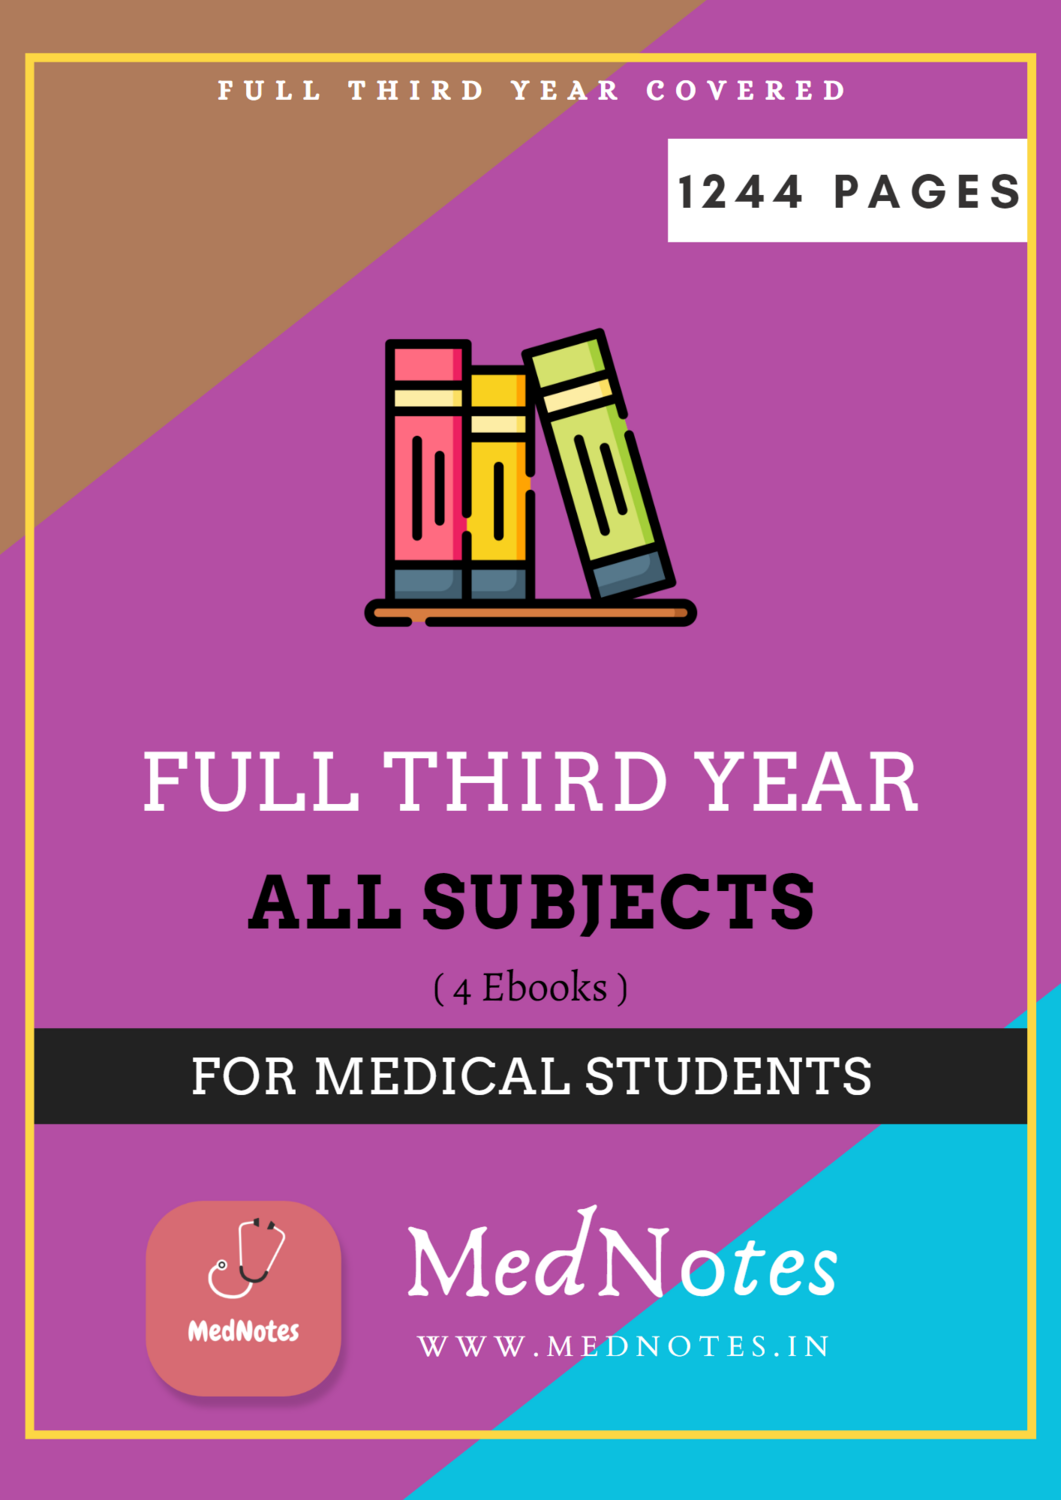 Full Third Year - All Subjects - MedNotes Ebooks